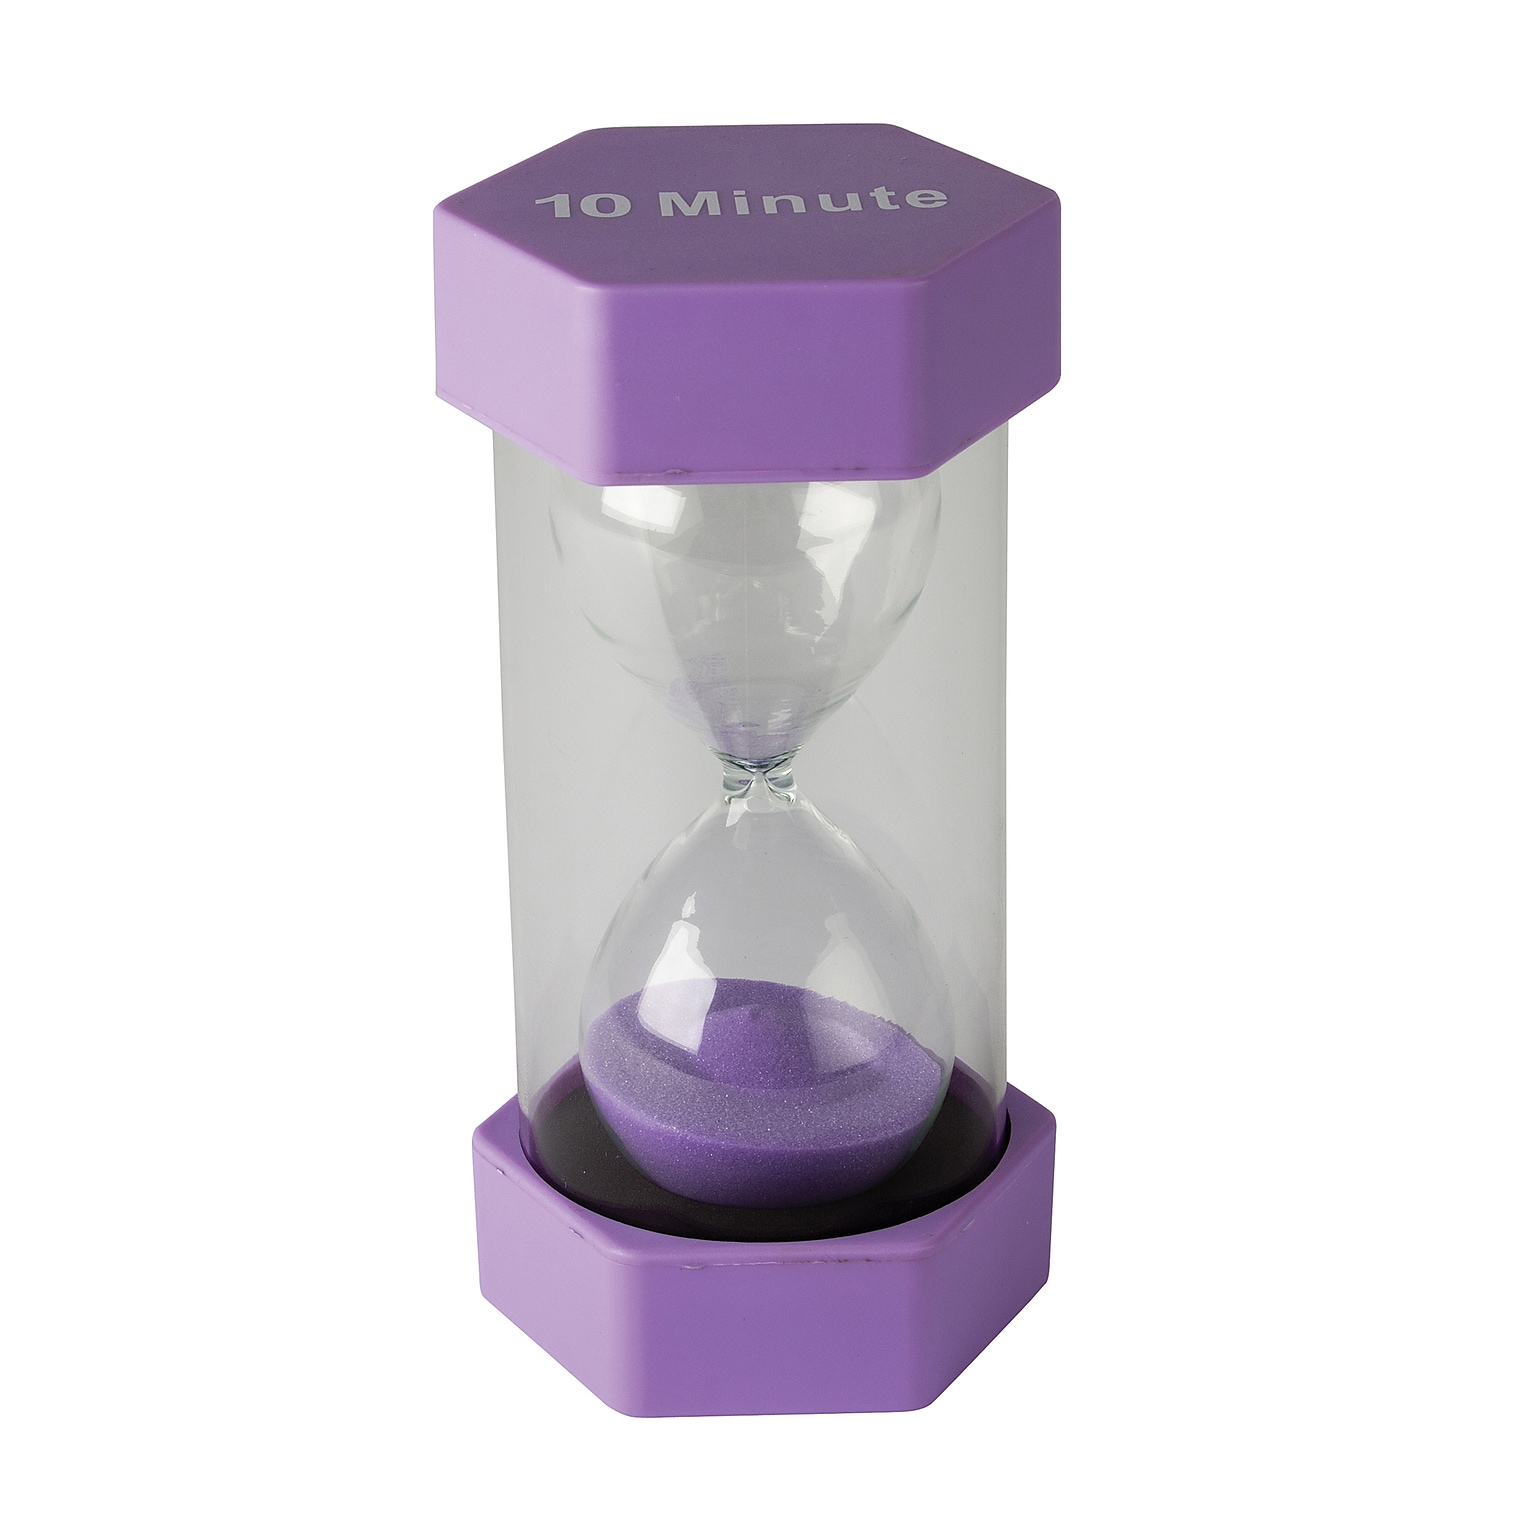 Teacher Created Resources 10 Minute Large Sand Timer, Ages 3-14 (TCR20675)